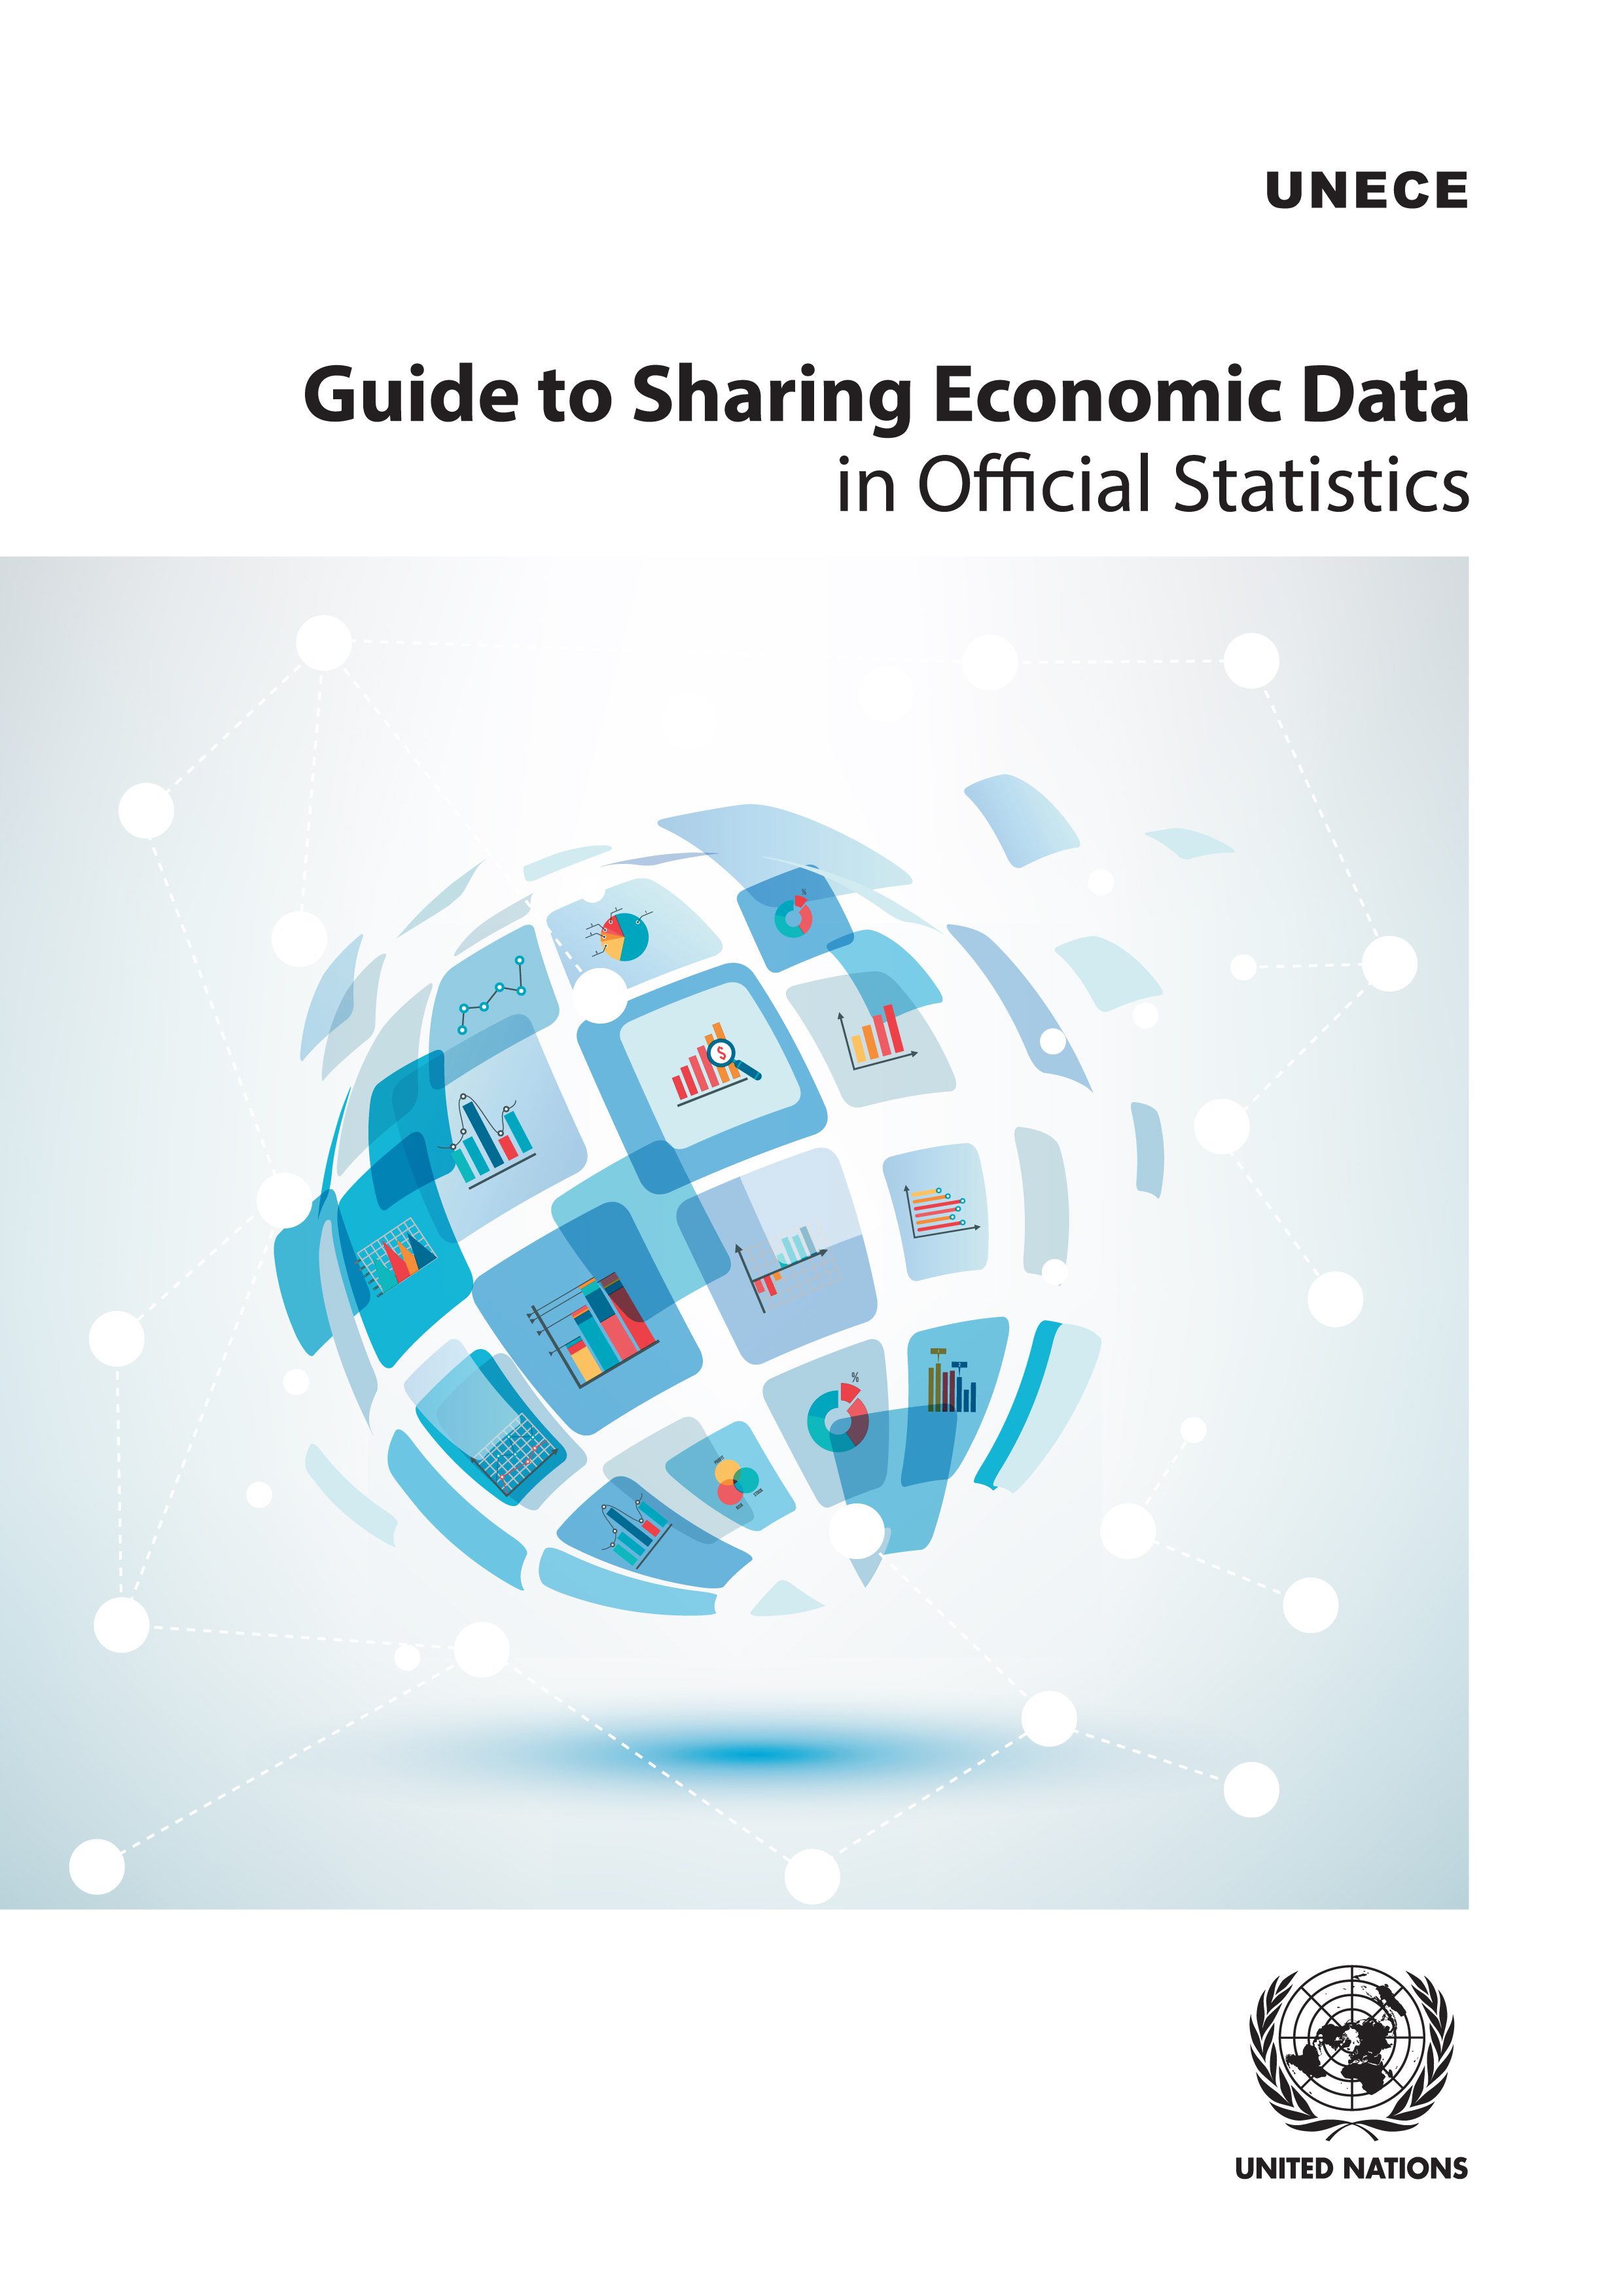 Guide to Sharing Economic Data in Official Statistics